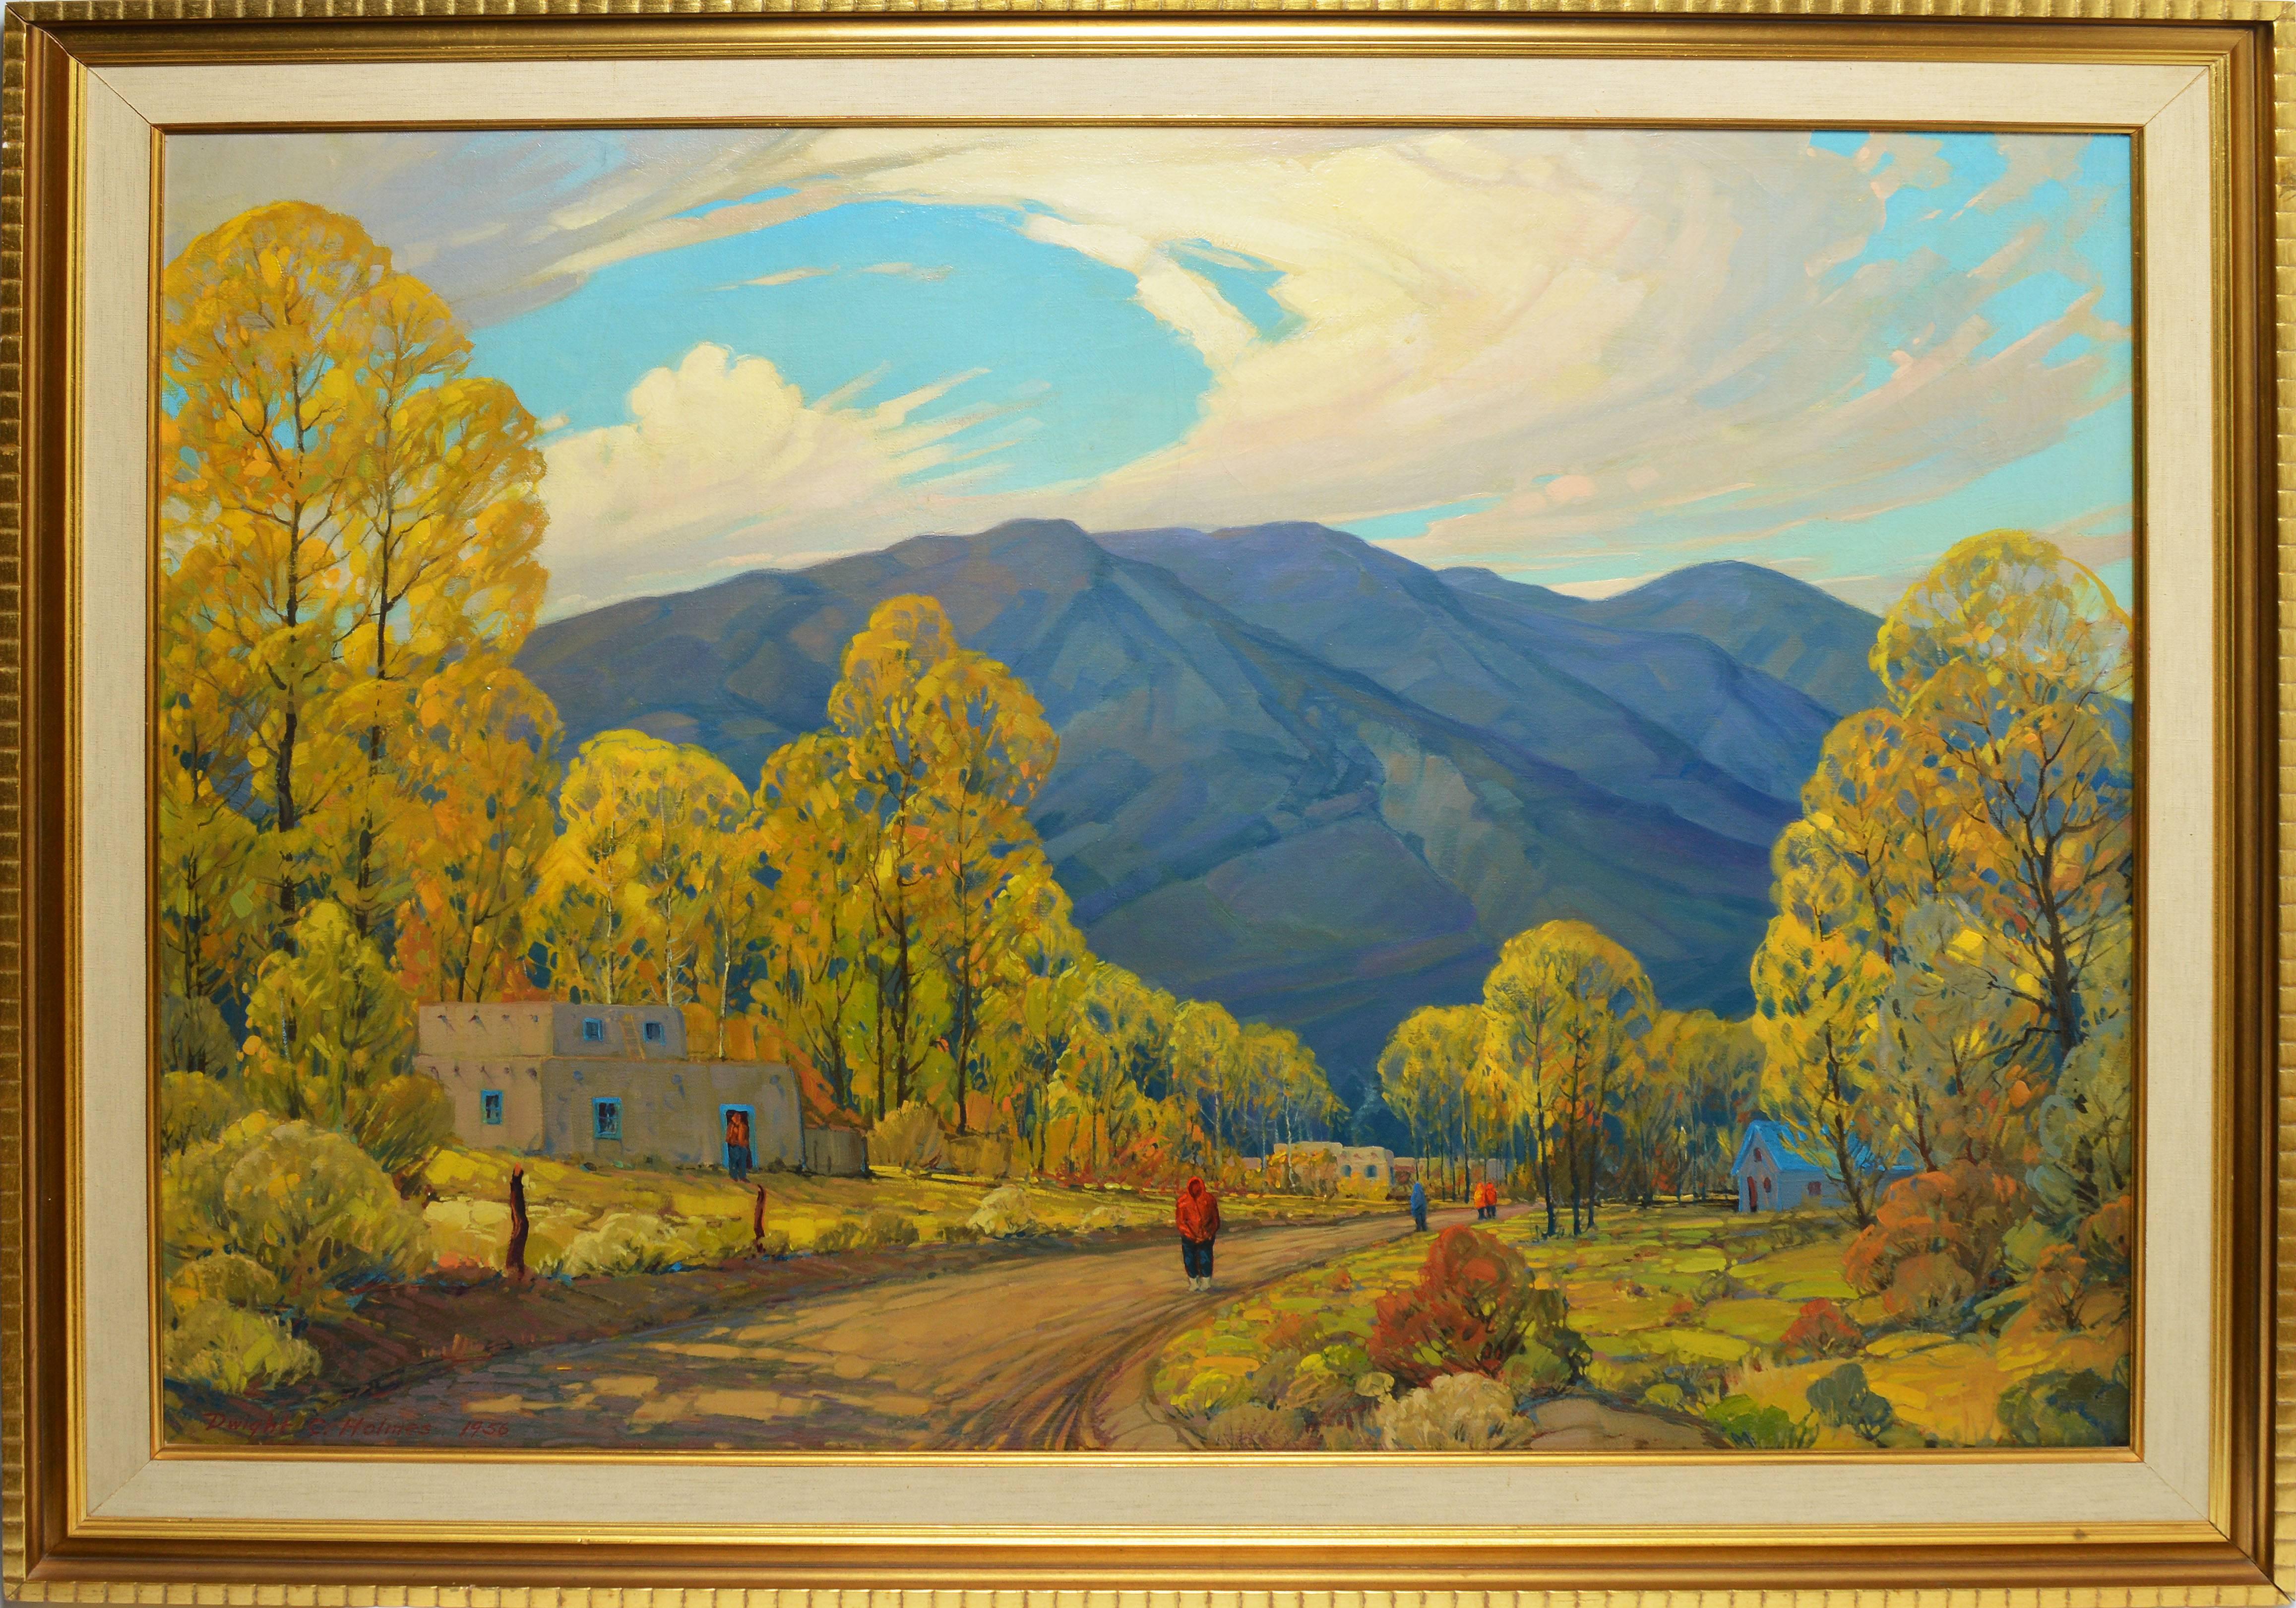 Modernist Southwestern landscape by Dwight Holmes  (1900-1986).  Oil on canvas, circa 1956.  Signed lower left, "Dwight C. Holmes 1956".   Displayed in a giltwood frame with linen liner.  Image size, 40"L x 30"H, overall 46"L x 36"H.